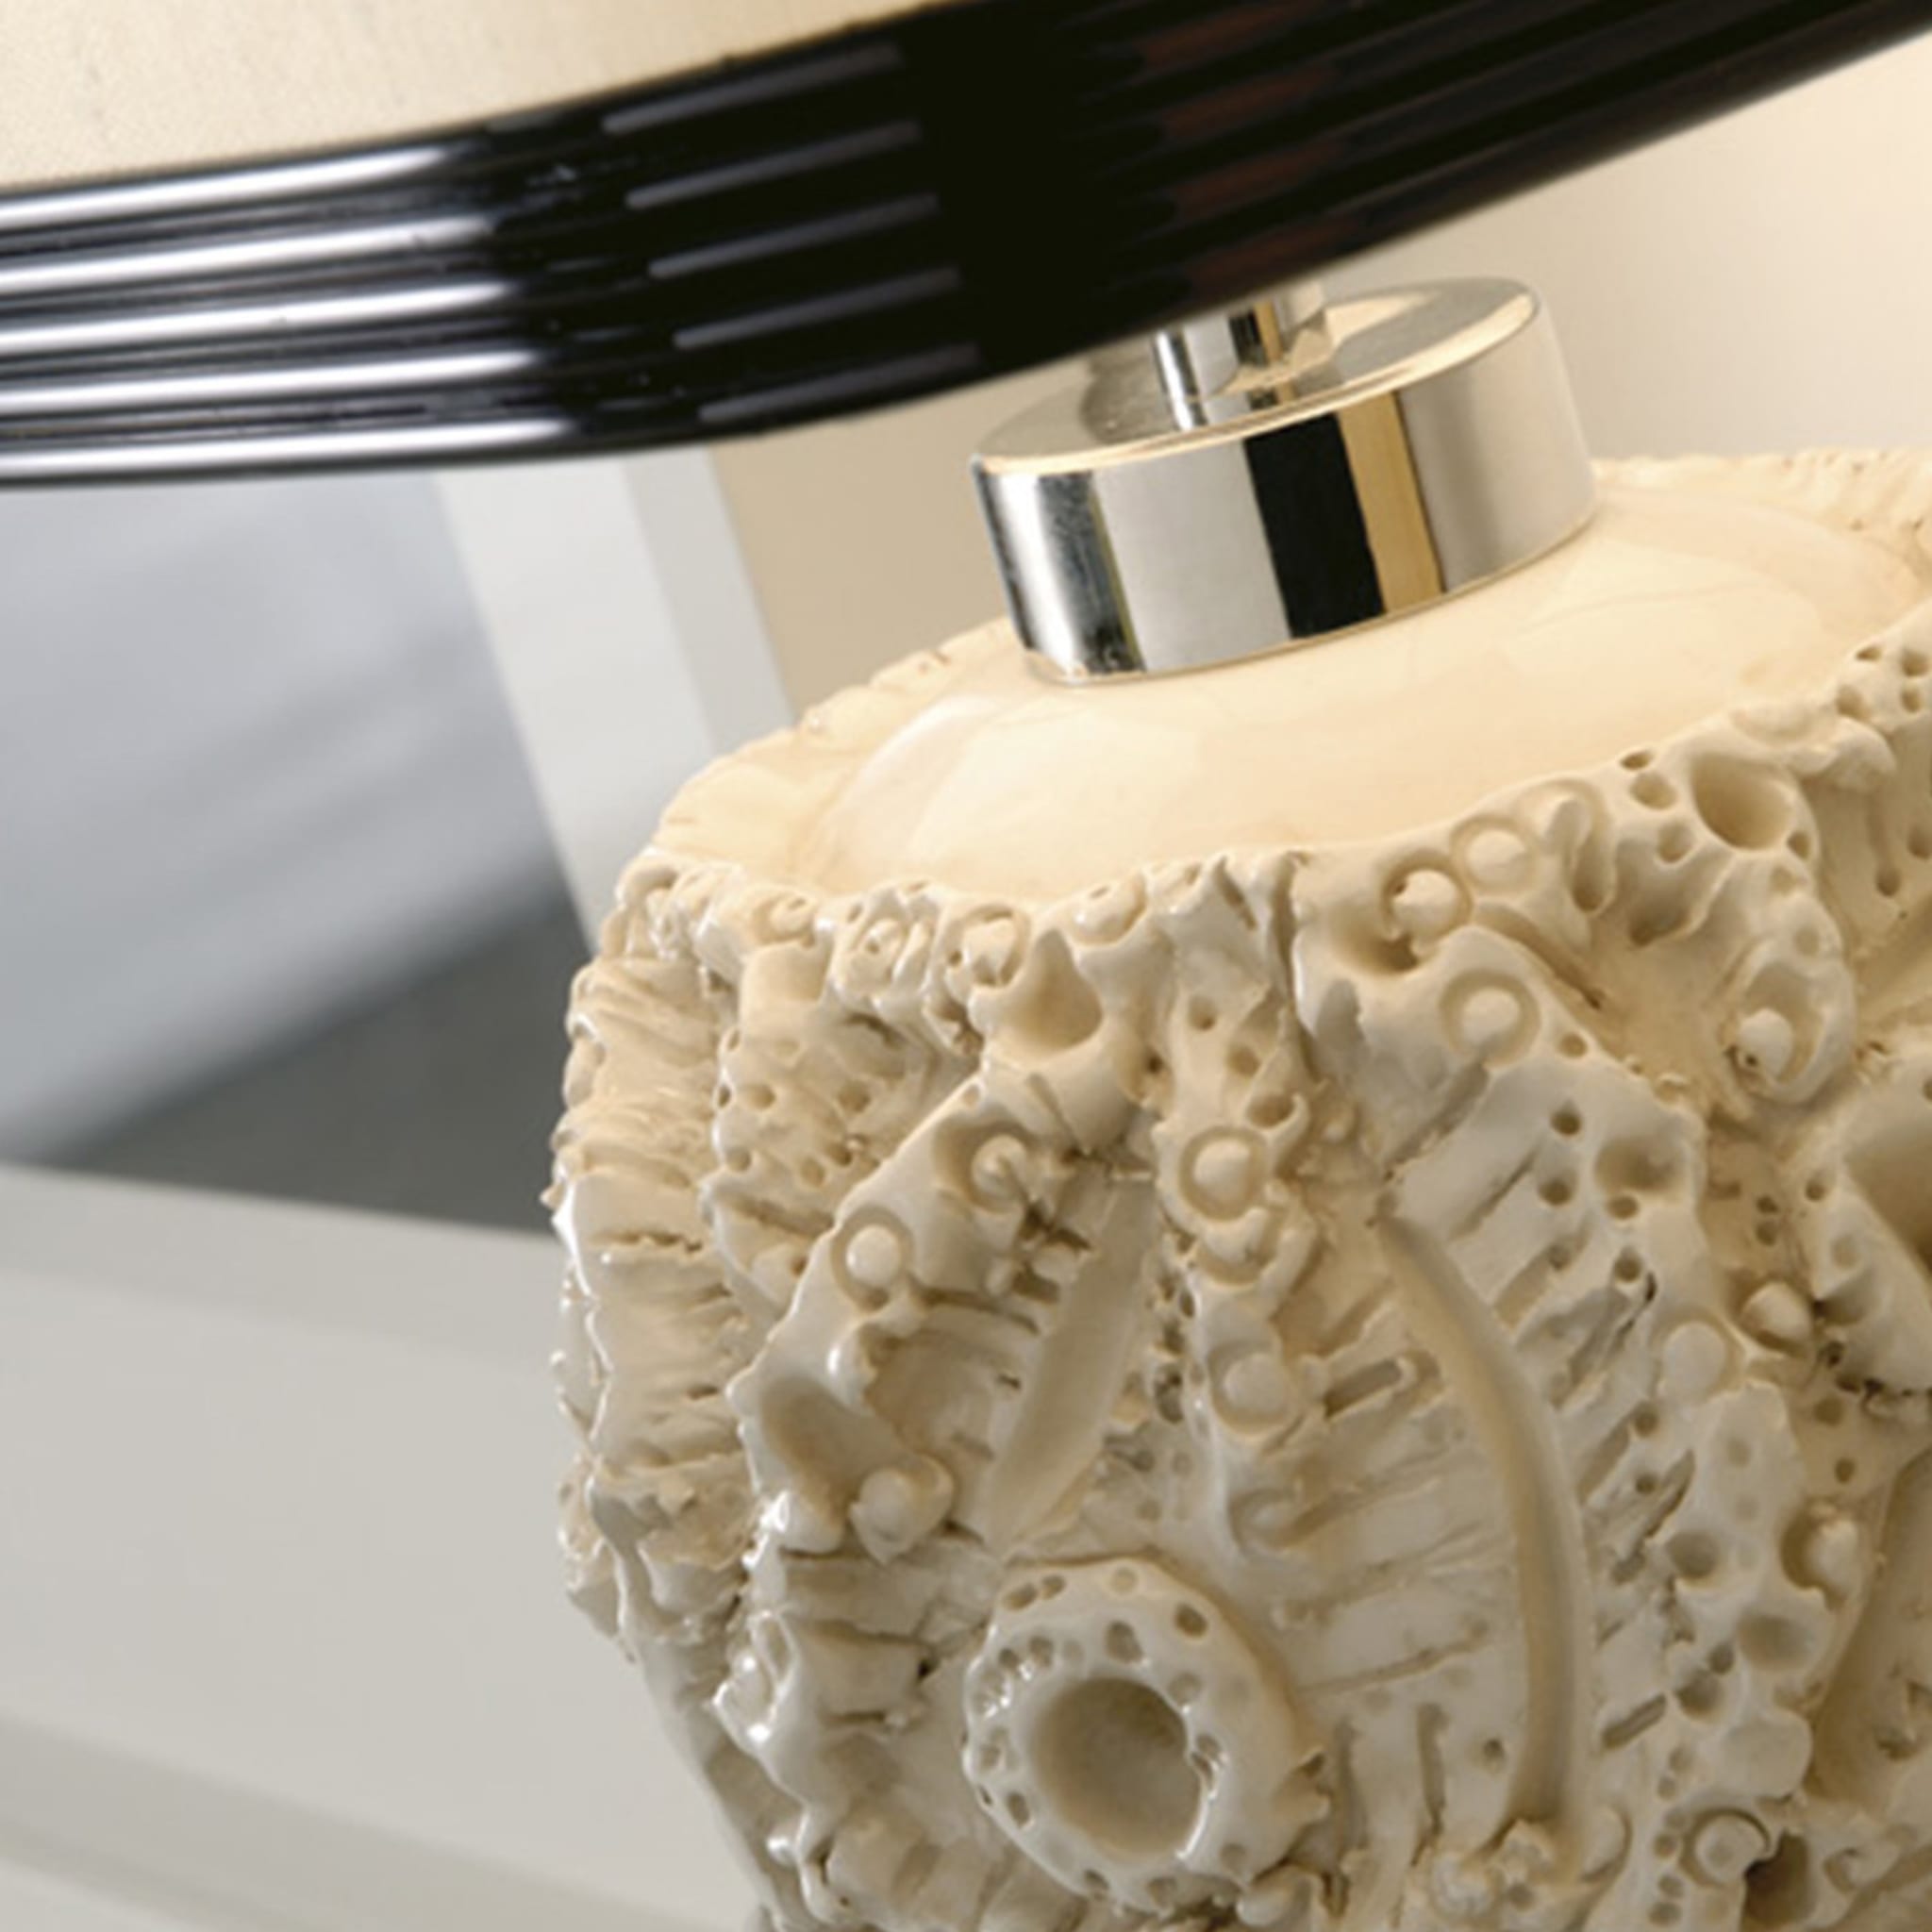 CL1842 Ivory Majolica Lamp with Lace-like design - Alternative view 1